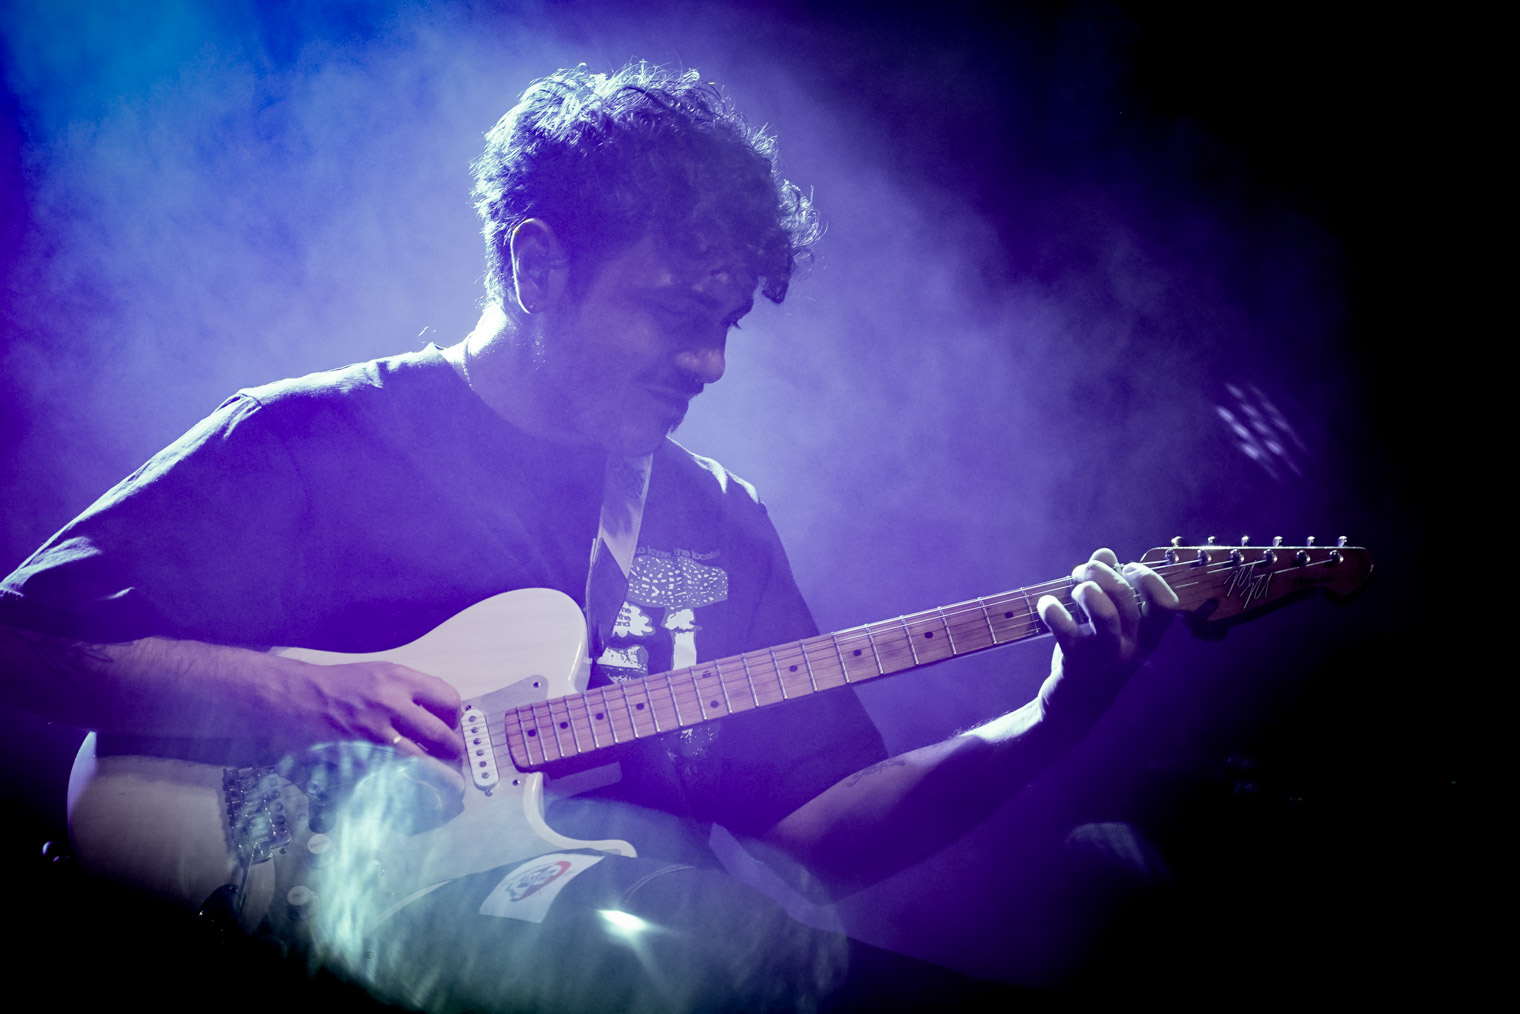 A musician playing guitar on stage